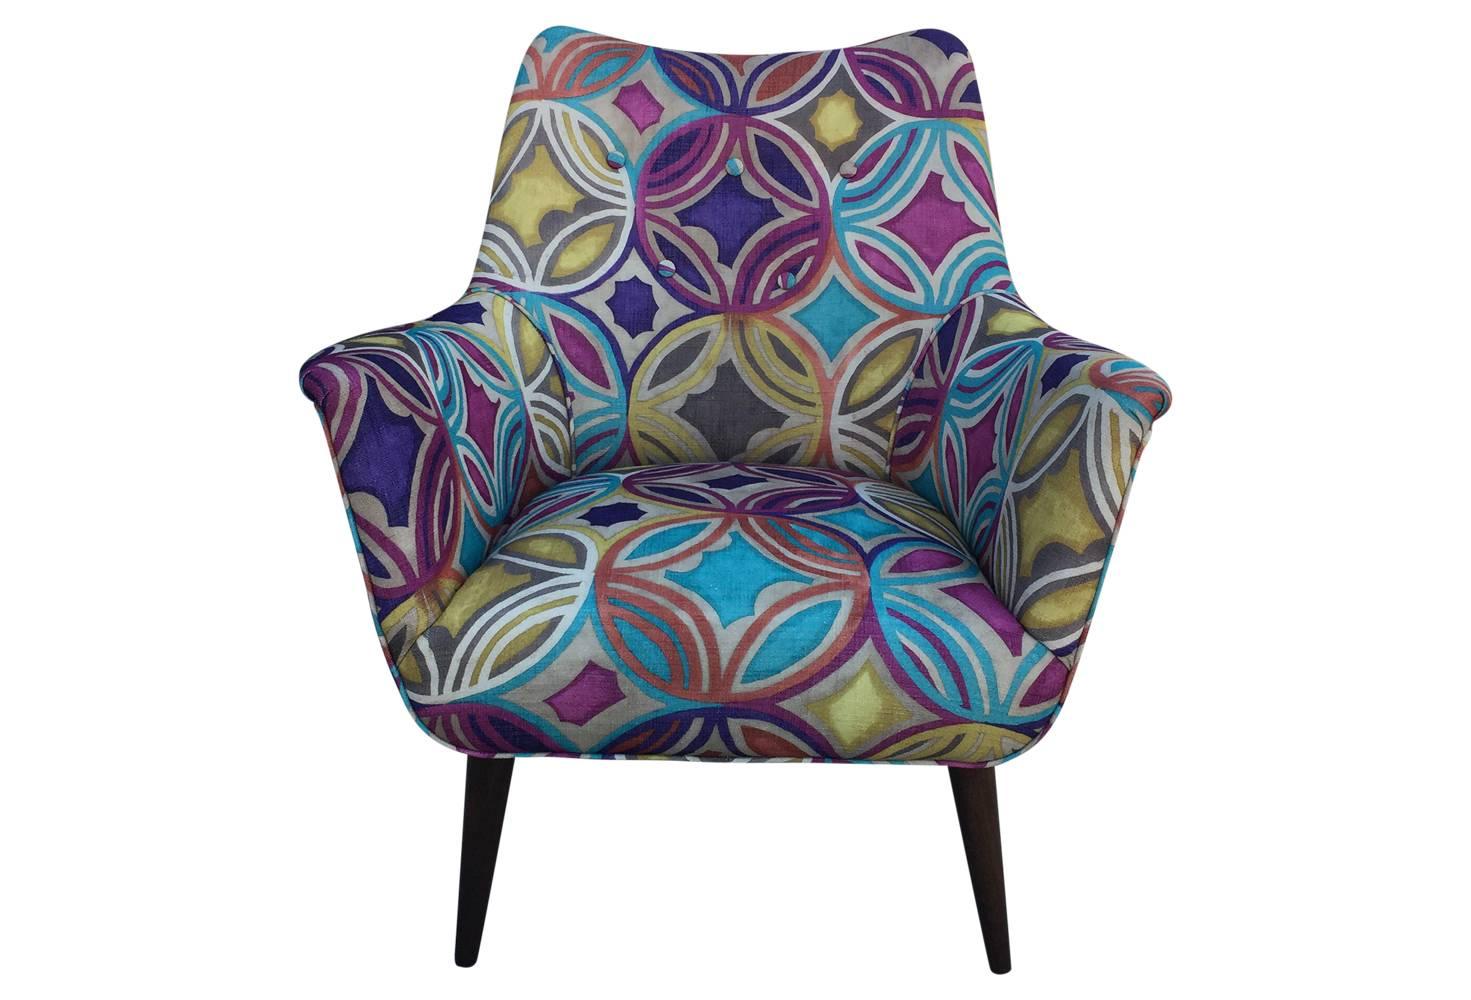 Walnut Colorful Mid-Century Modern Danish Chair in Abstract Expressionist Fabric